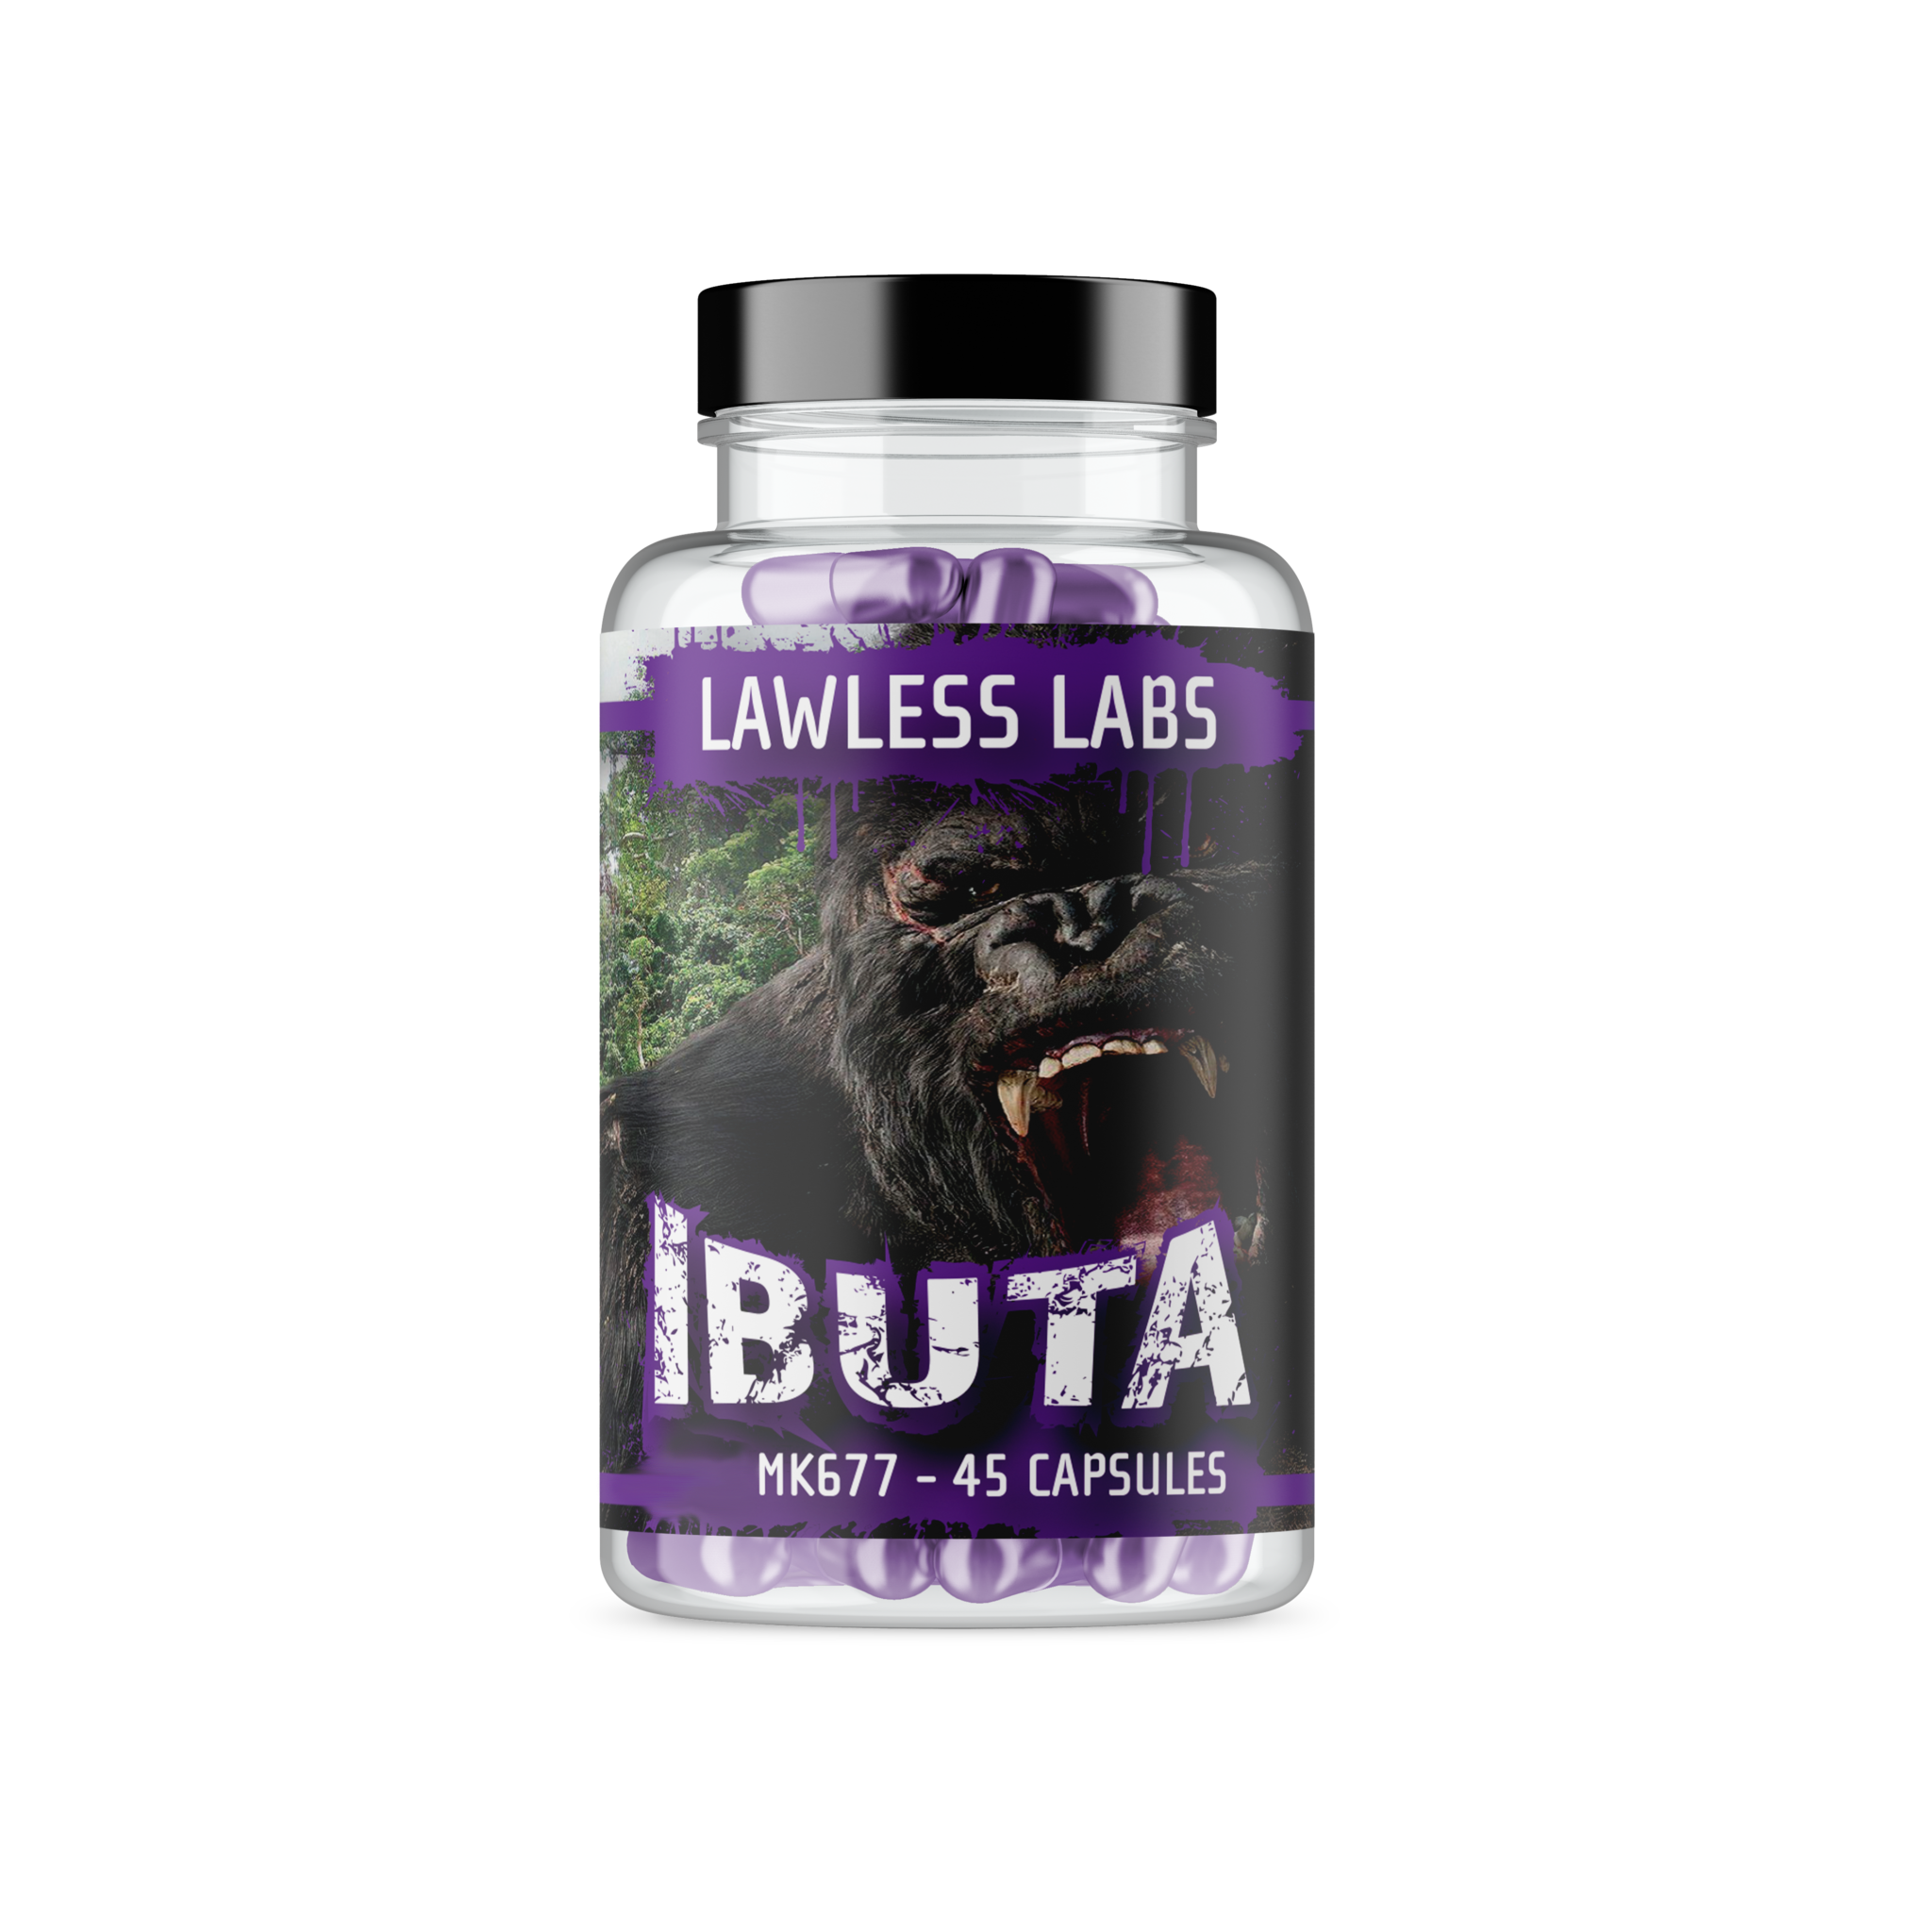 lawless labs